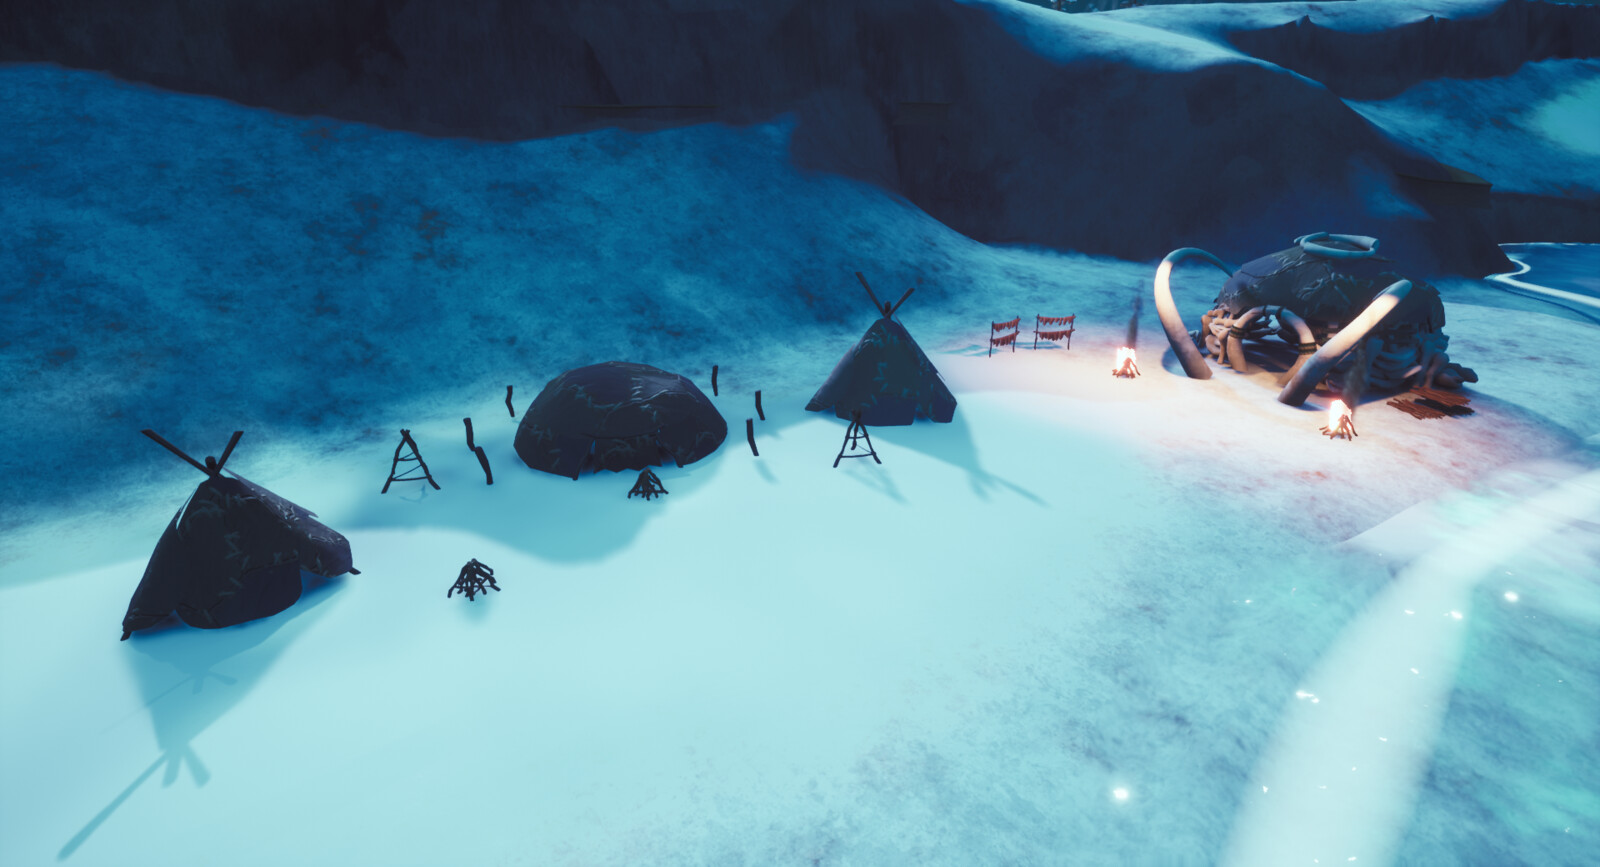 In-game render of the huts and tipis